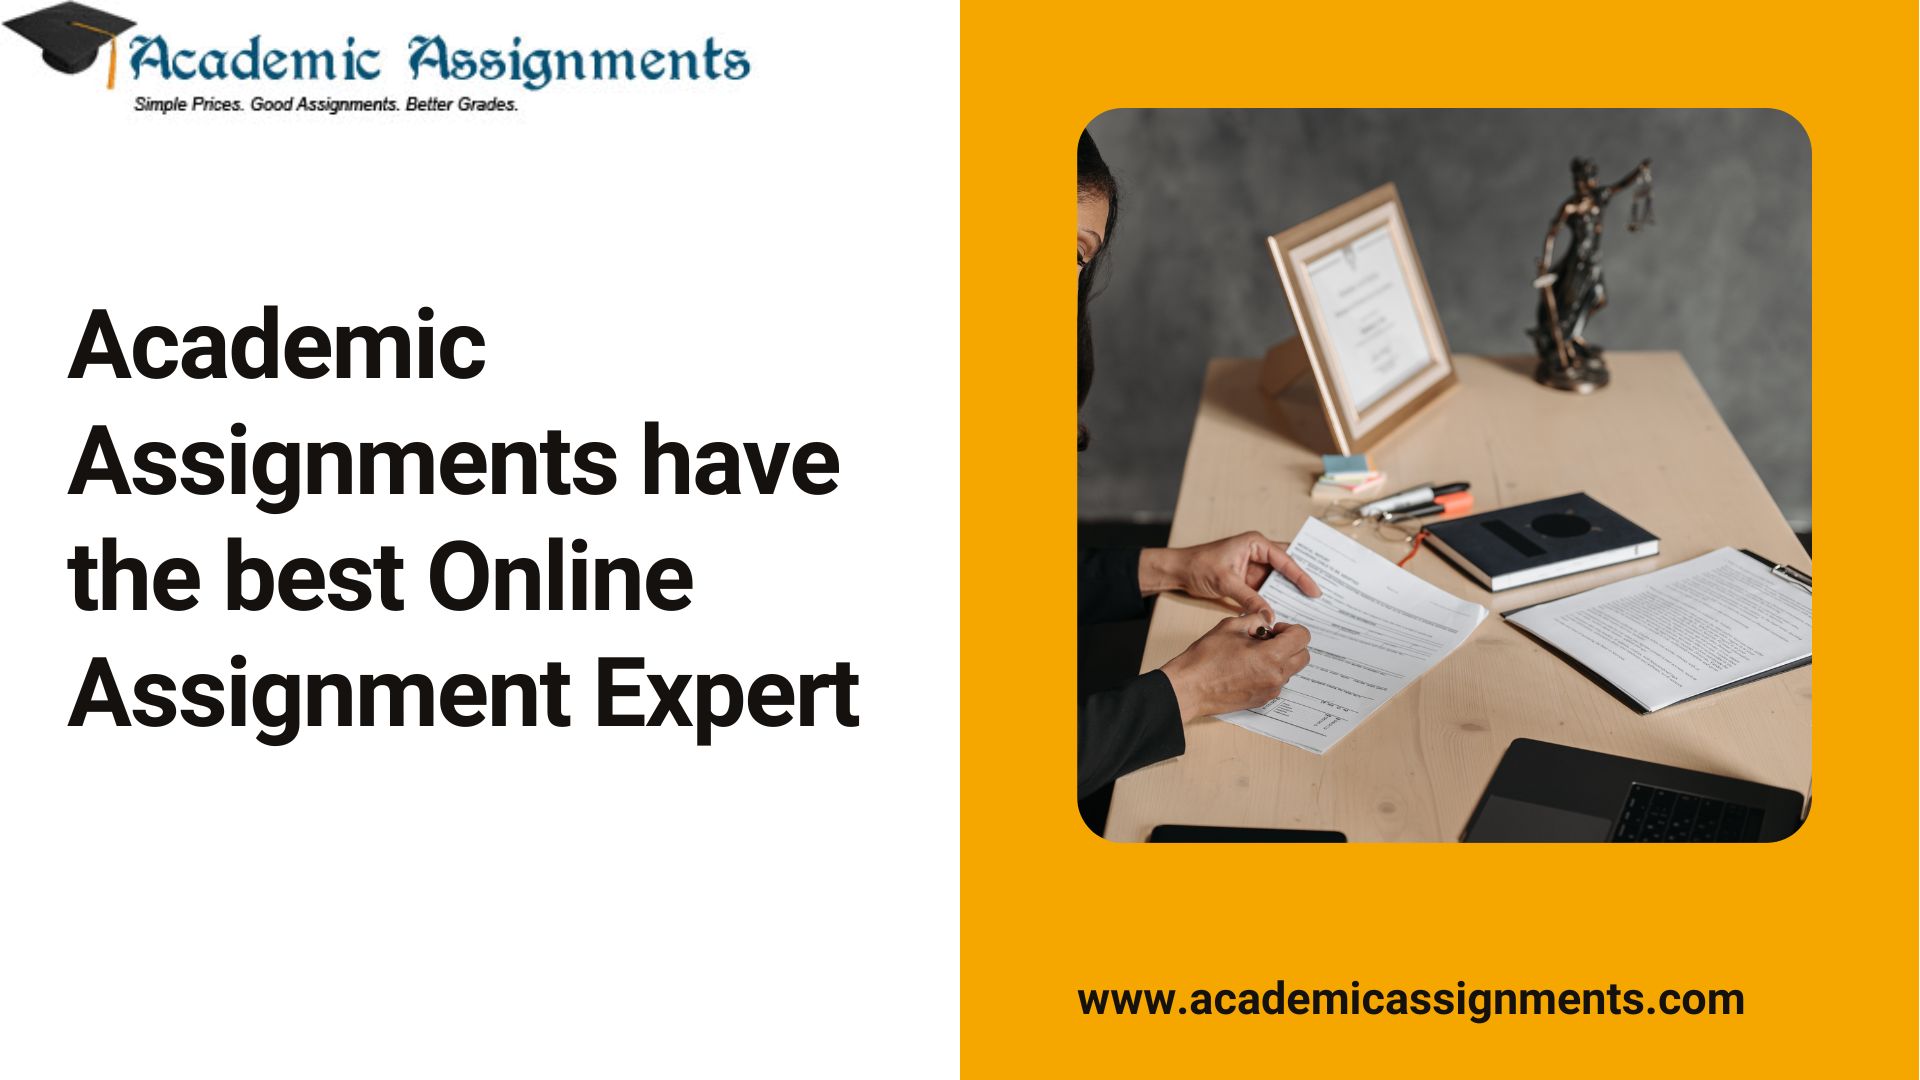 Academic Assignments have the best Online Assignment Expert